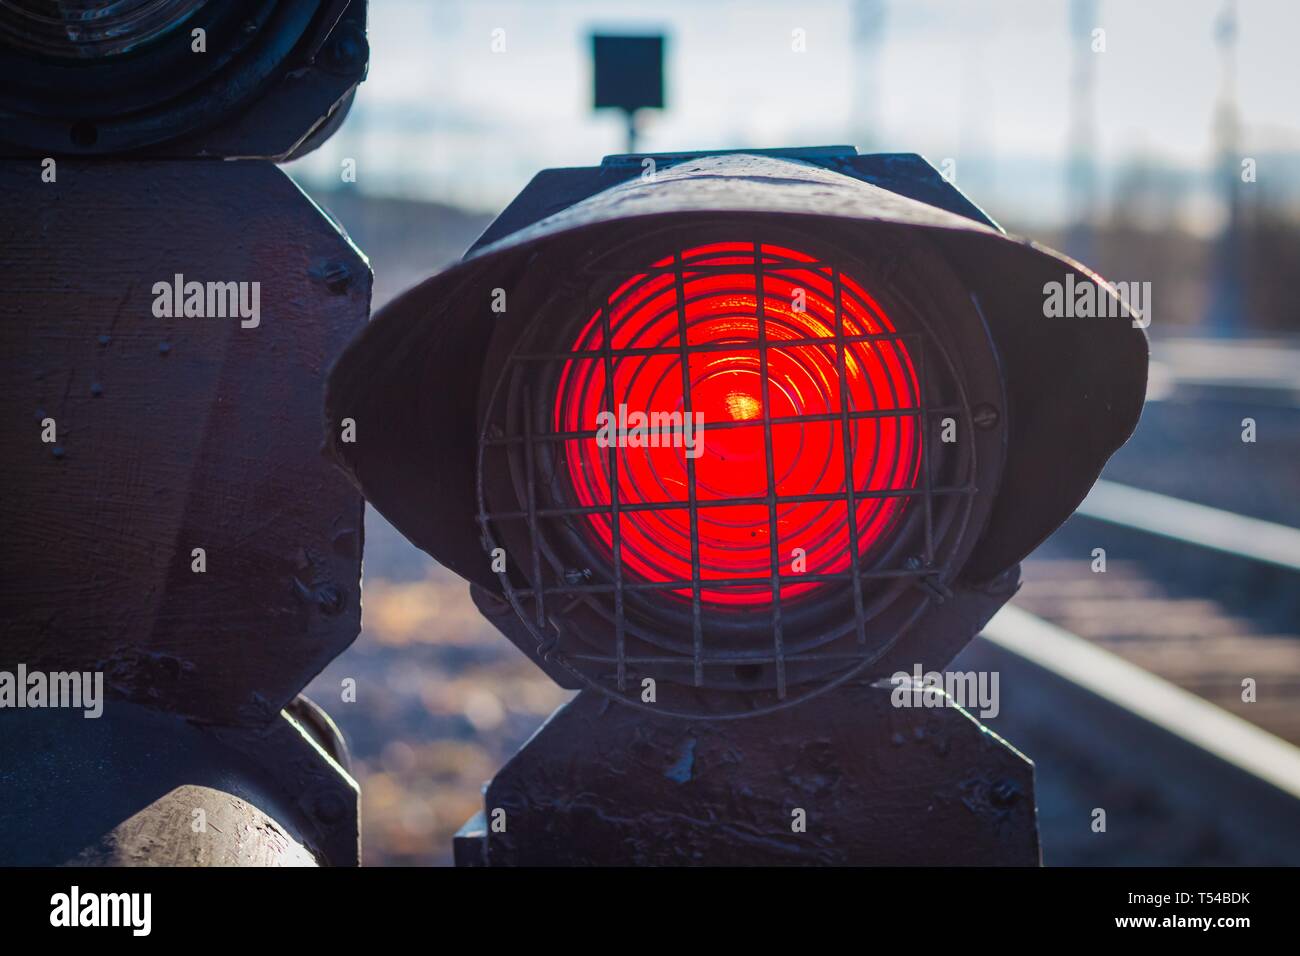 There is a traffic light on the railway for warning of train movement. The traffic light is lit in red warning of the approaching train. Stock Photo